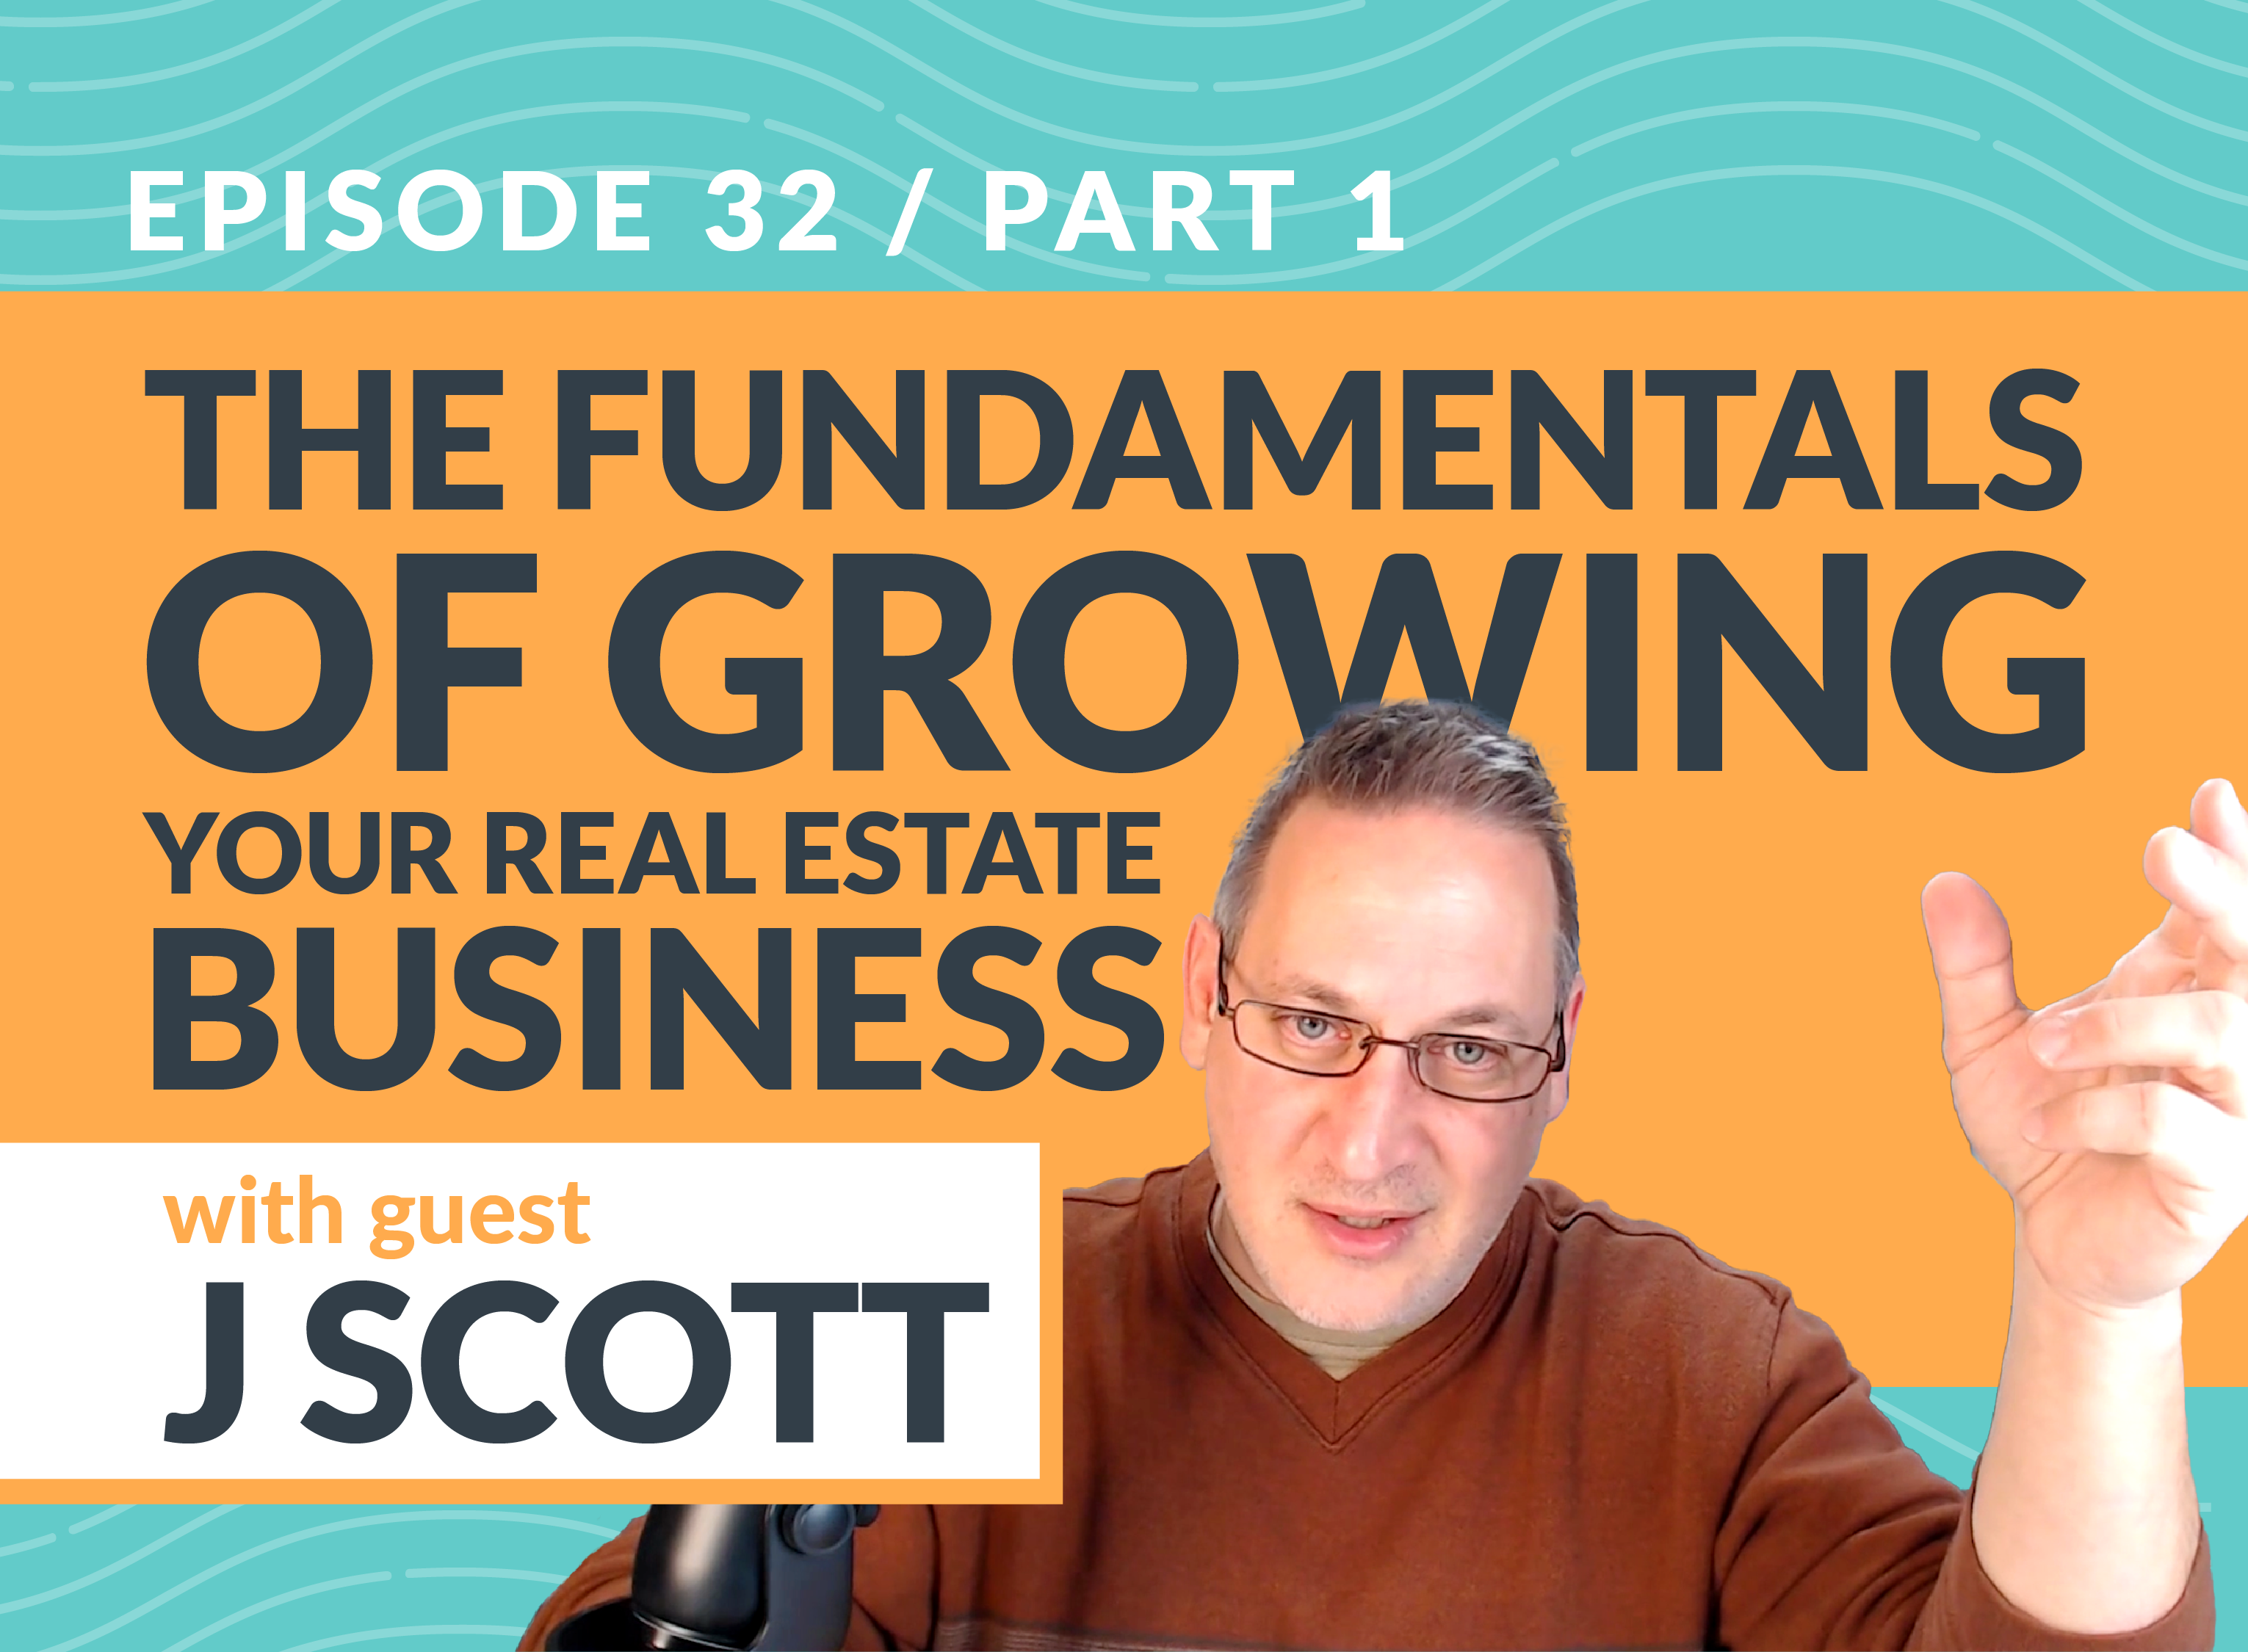 J Scott on the Real Estate Investing Unscripted podcast